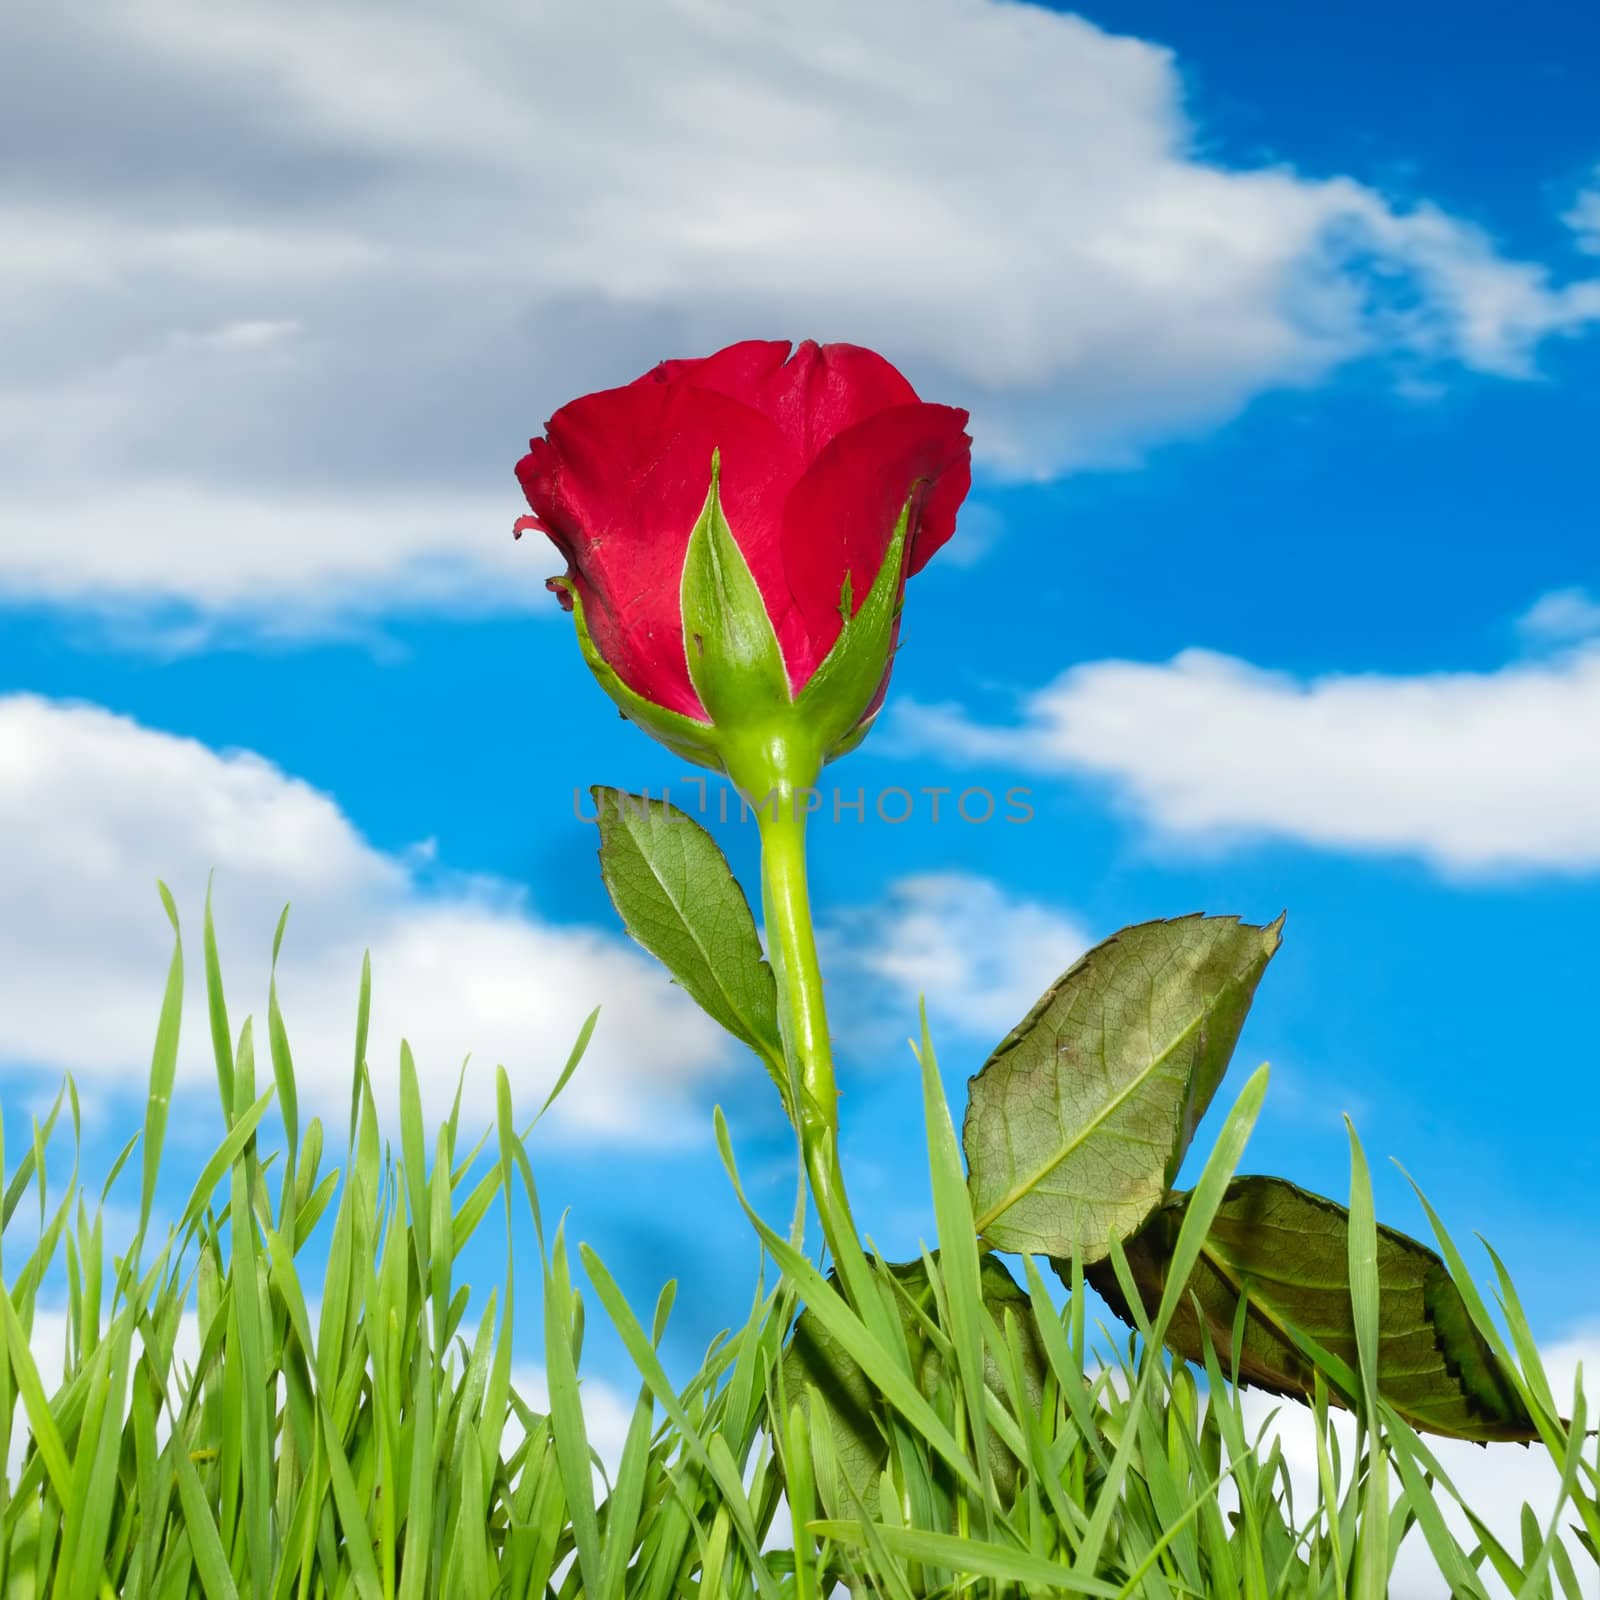 Red rose and green grass with blue sky and clouds in the background.